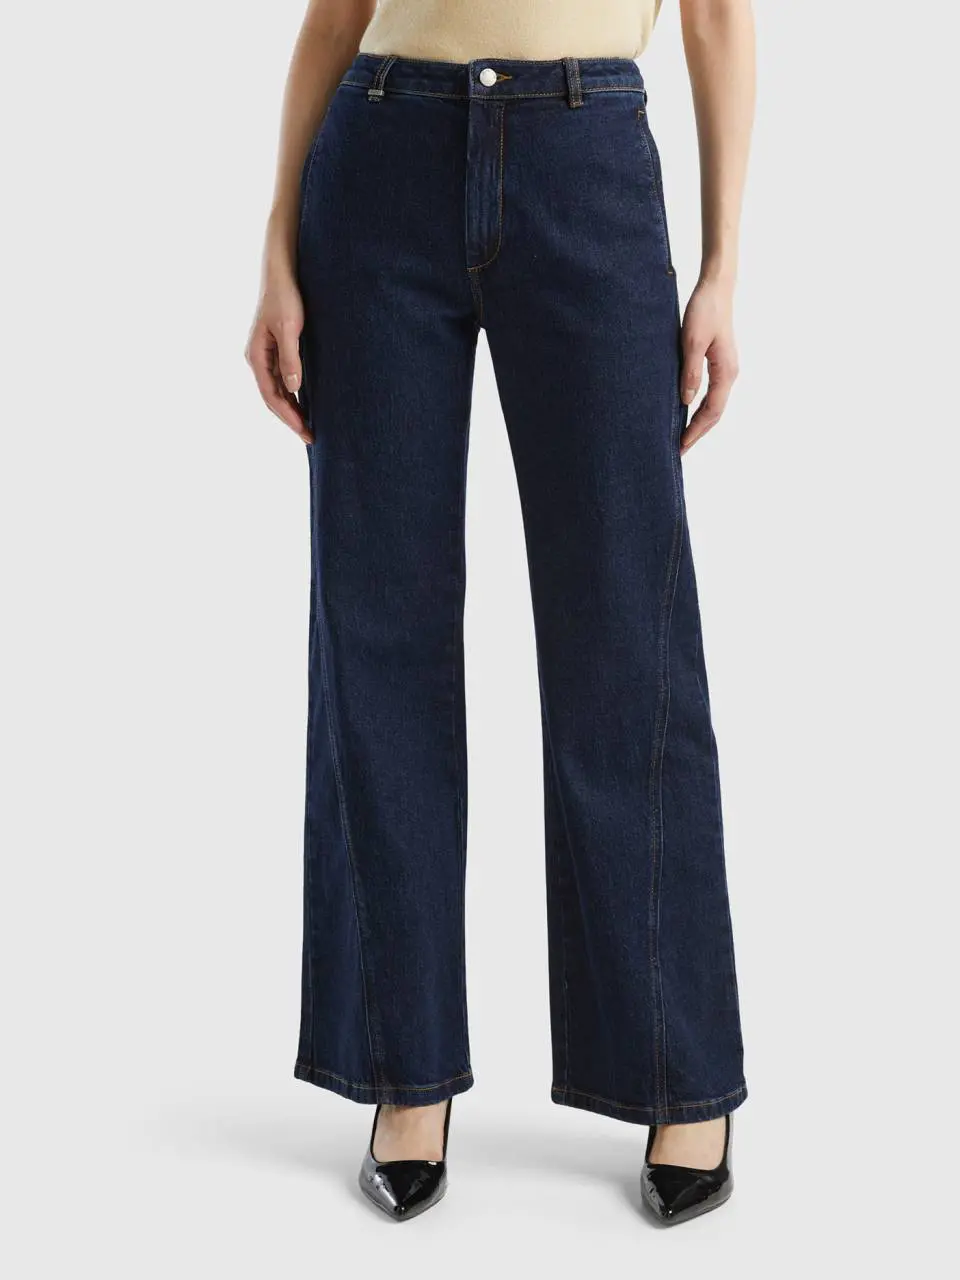 Benetton relaxed flared jeans. 1